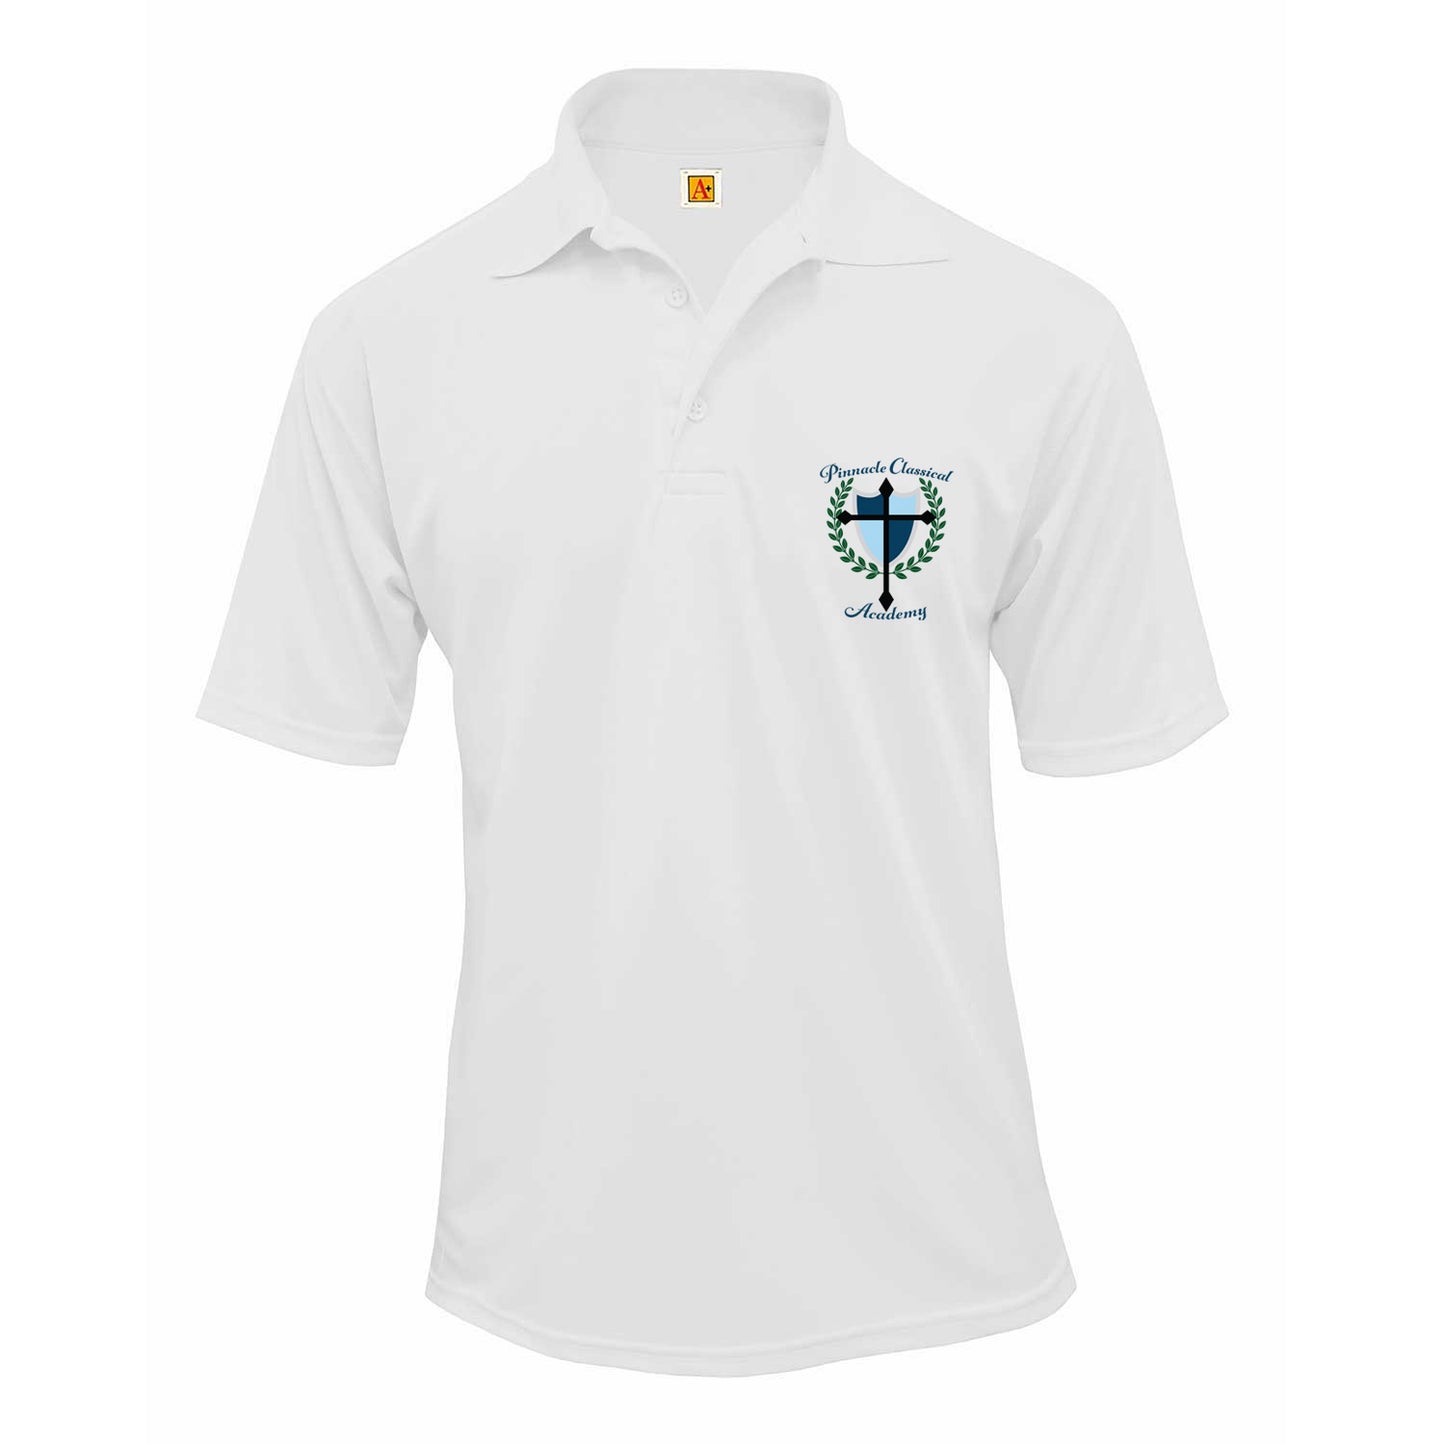 Youth Performance Polo with PCA Logo